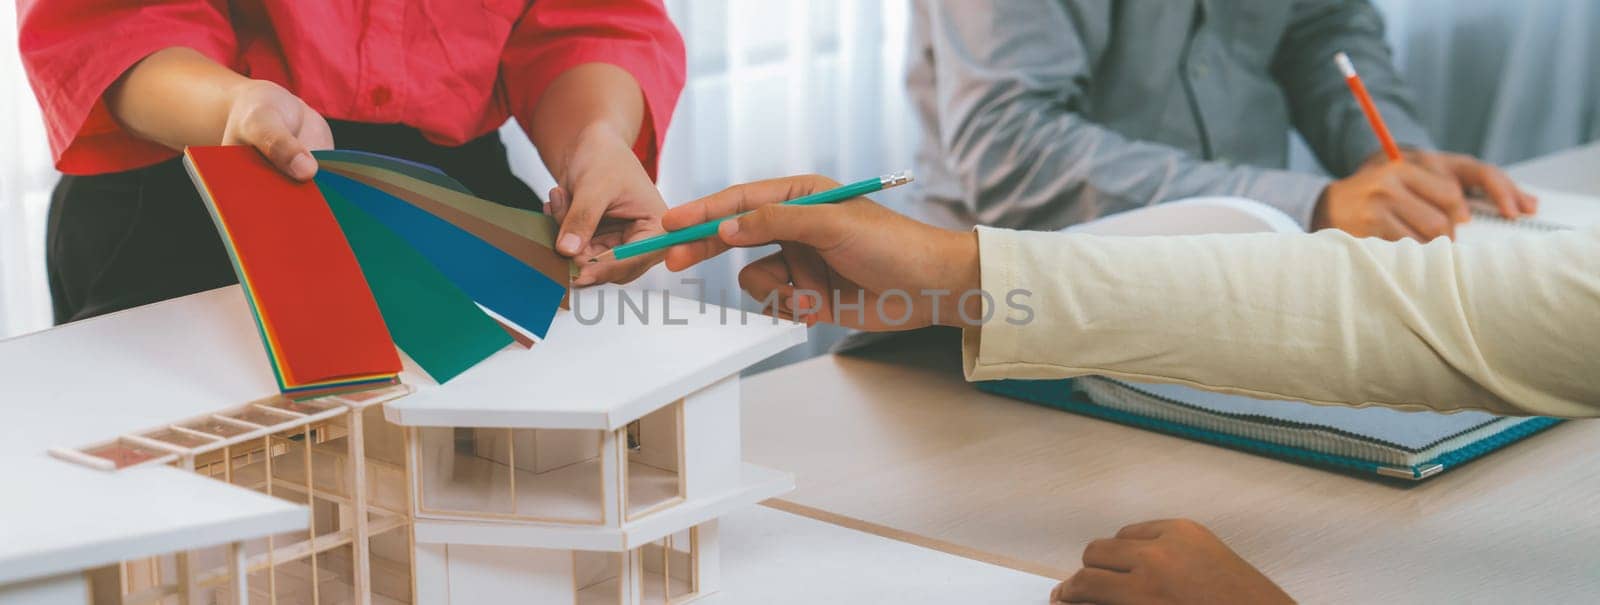 Cropped image of skilled architect and interior designer team collaborate to select house color theme at meeting room with house model placed on table. Creative working and design concept. Variegated.